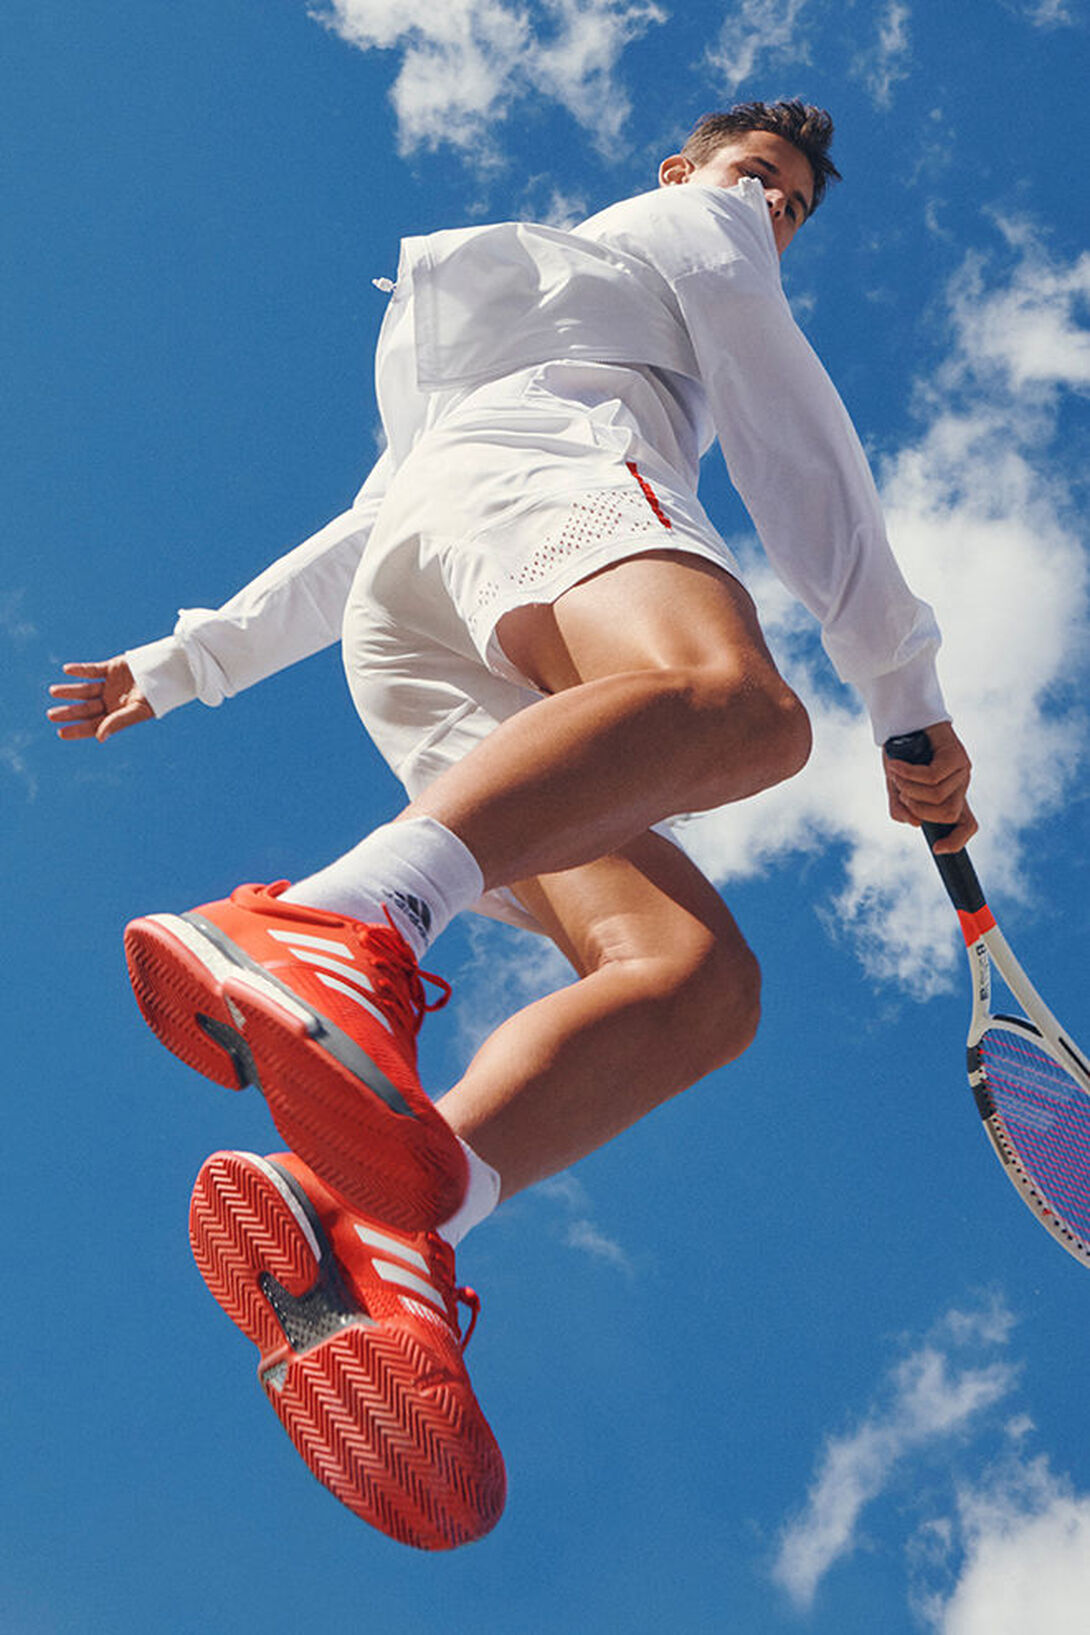 bang Hotel Specialist Sportswear with a purpose: the adidas by Stella McCartney Tennis Collection